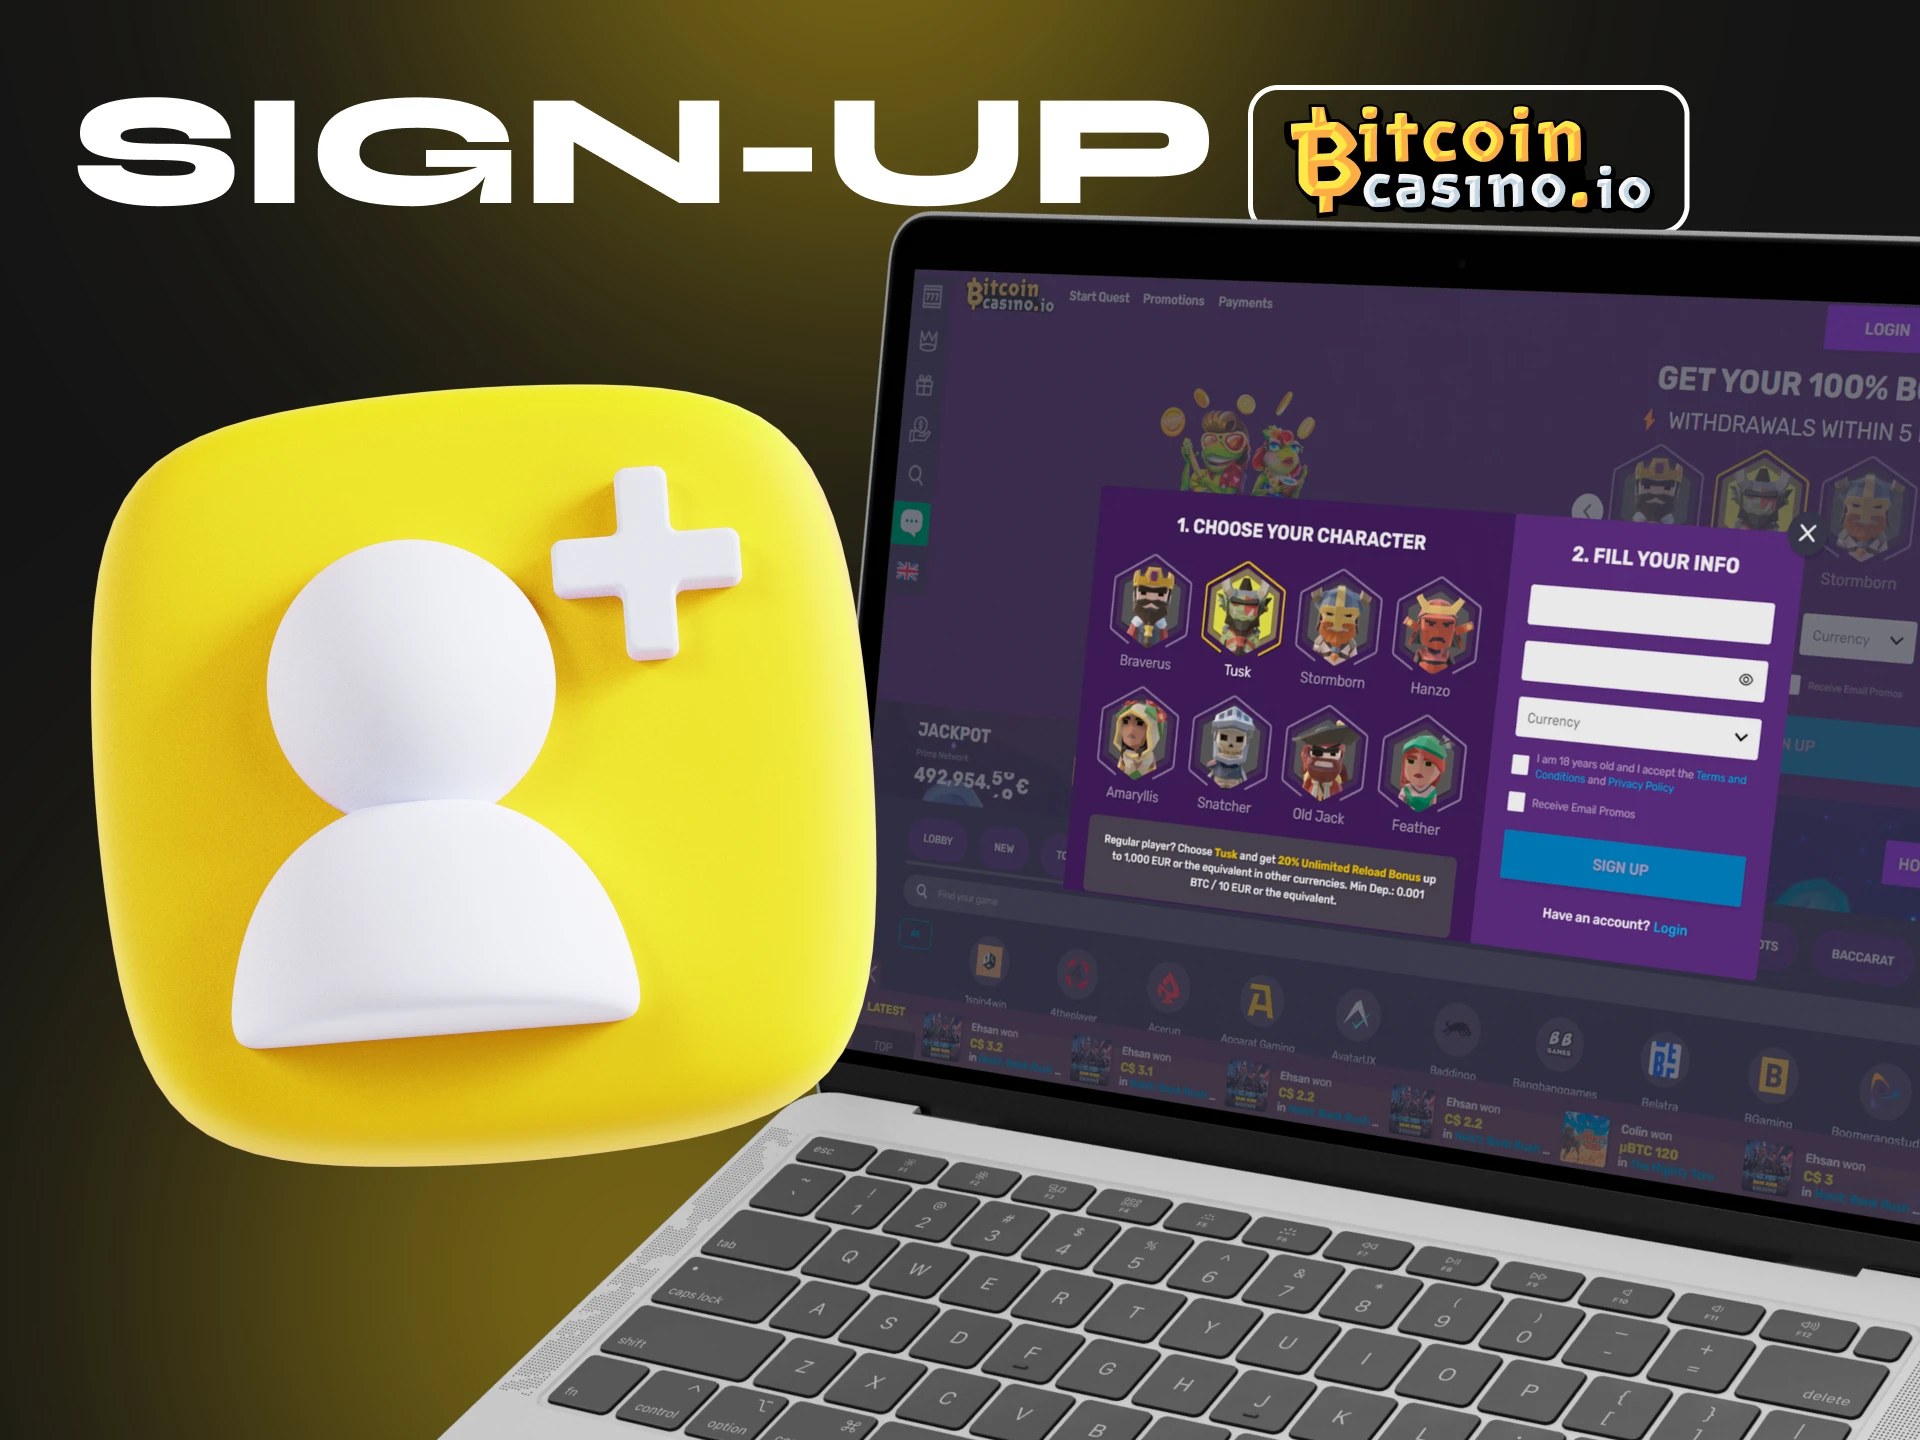 Here is a guide to creating a Bitcoincasino account.